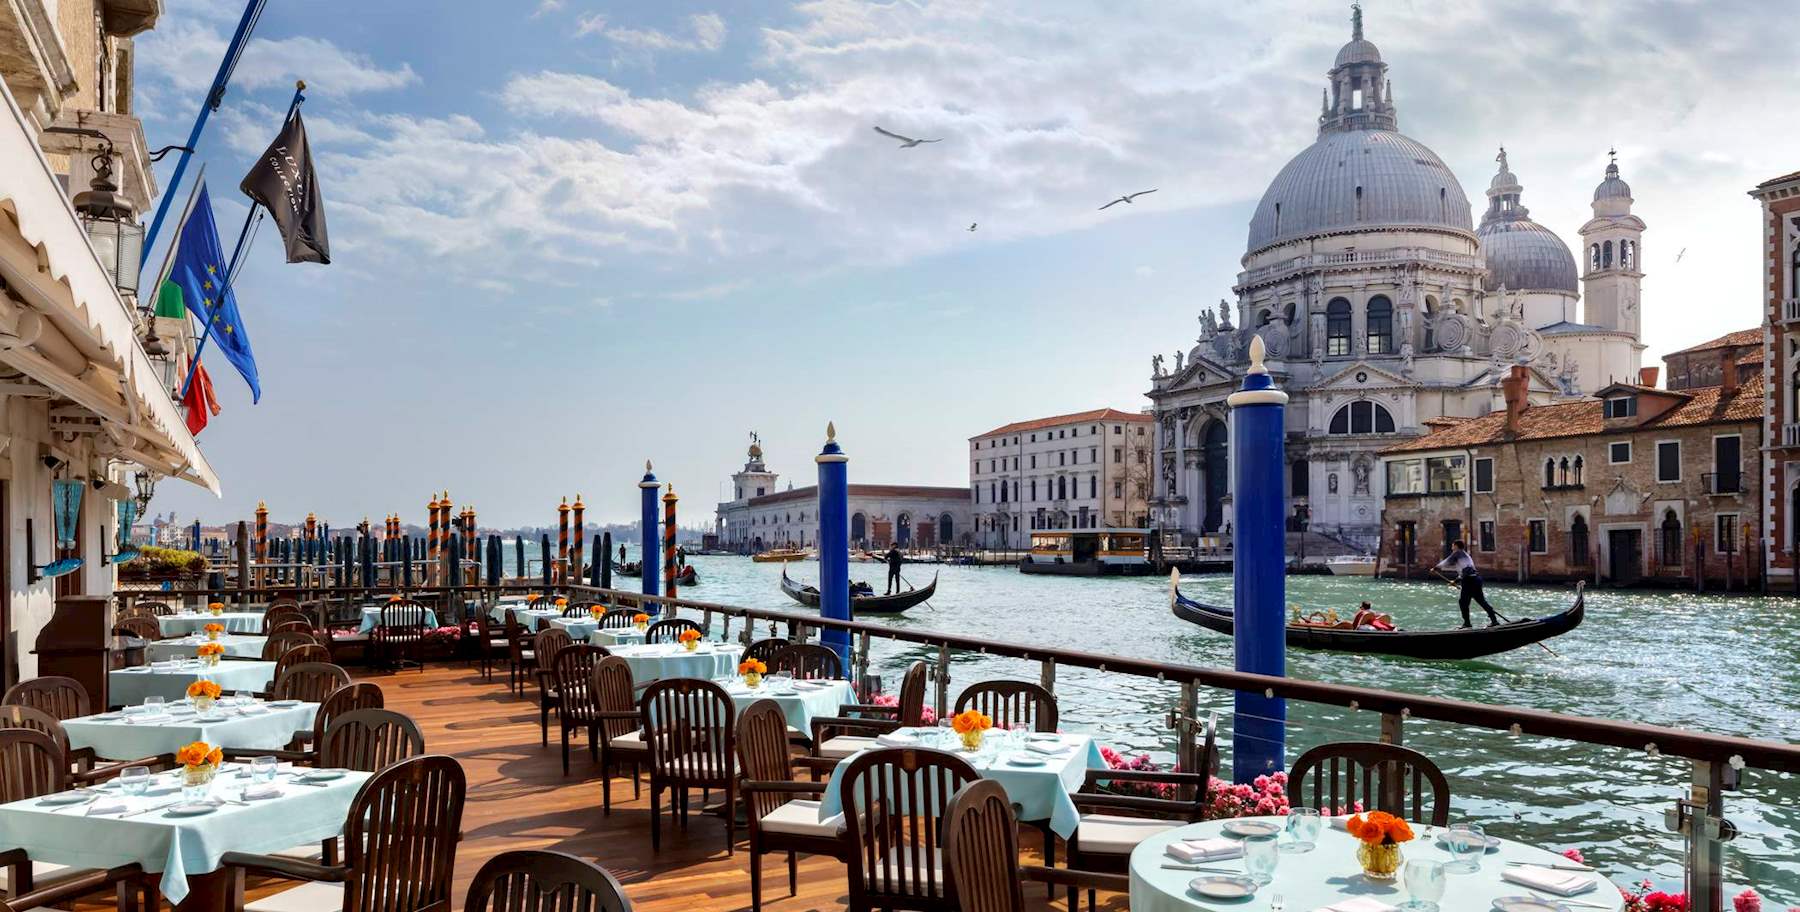 Gritti Palace Restaurant in Venice Italy, Canalside dining at one of the top 10 restaurants with best views in the world